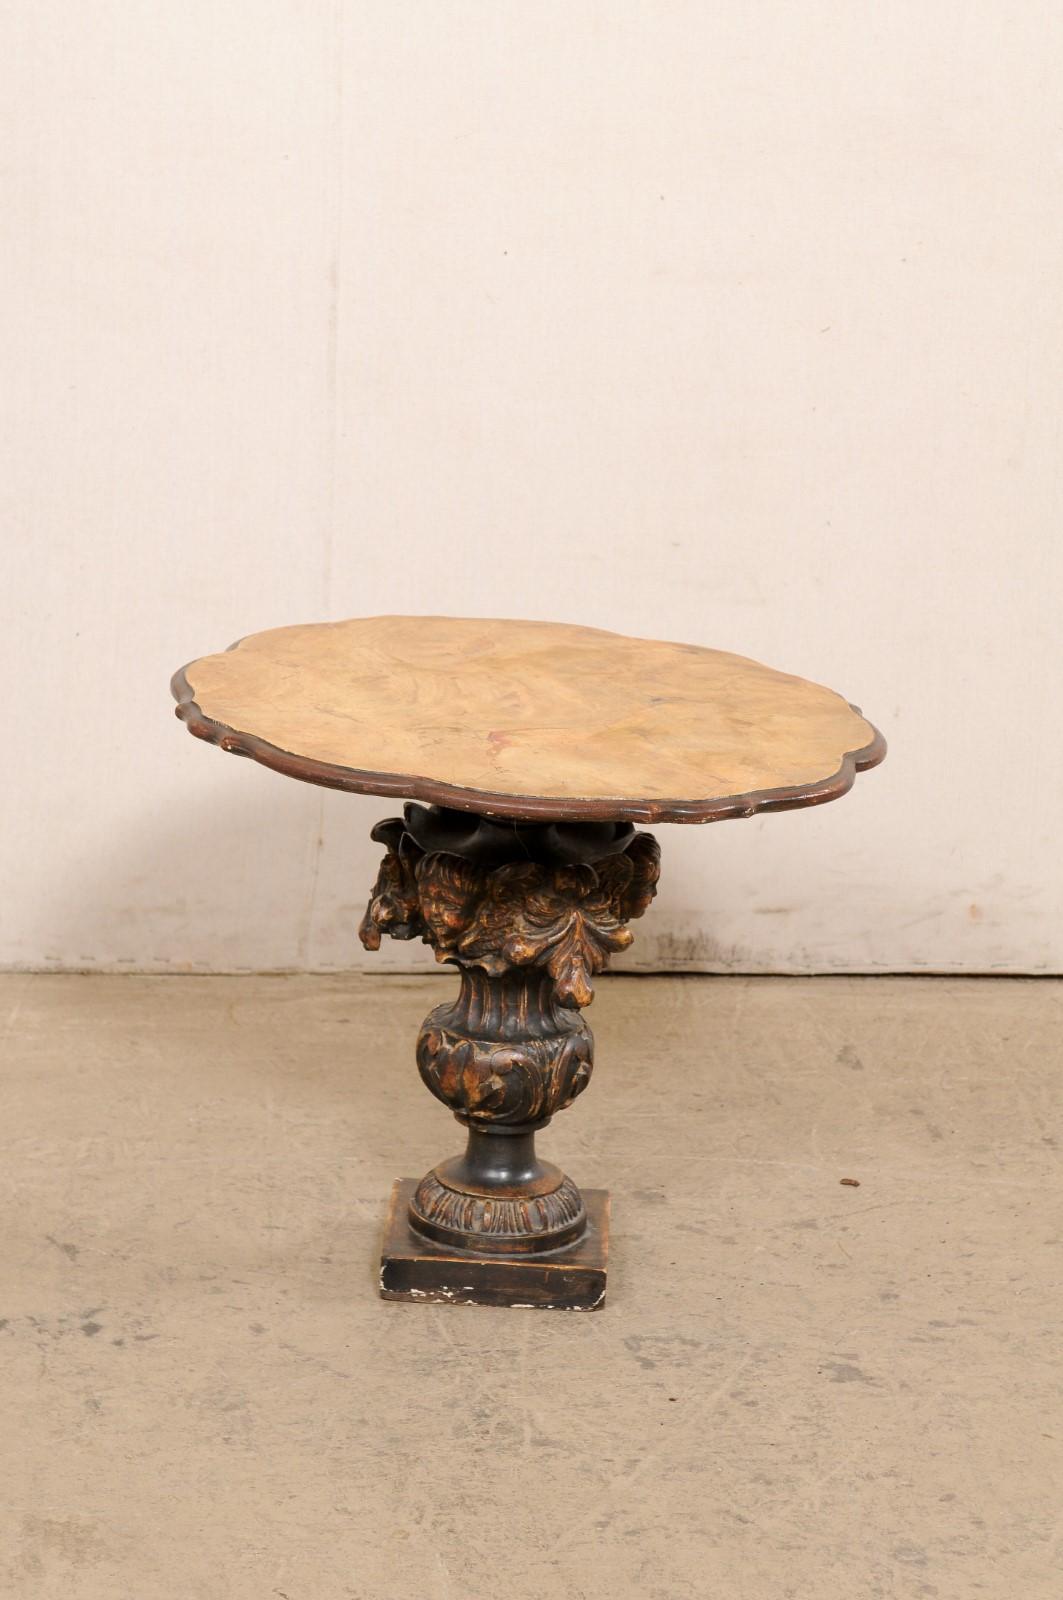 An Italian side table, with putto and urn carved pedestal base, from the 19th century. This antique table from Italy features a round-shaped top with faux-marble finish and scalloped edges, above an urn, putto, and foliate carved pedestal, and